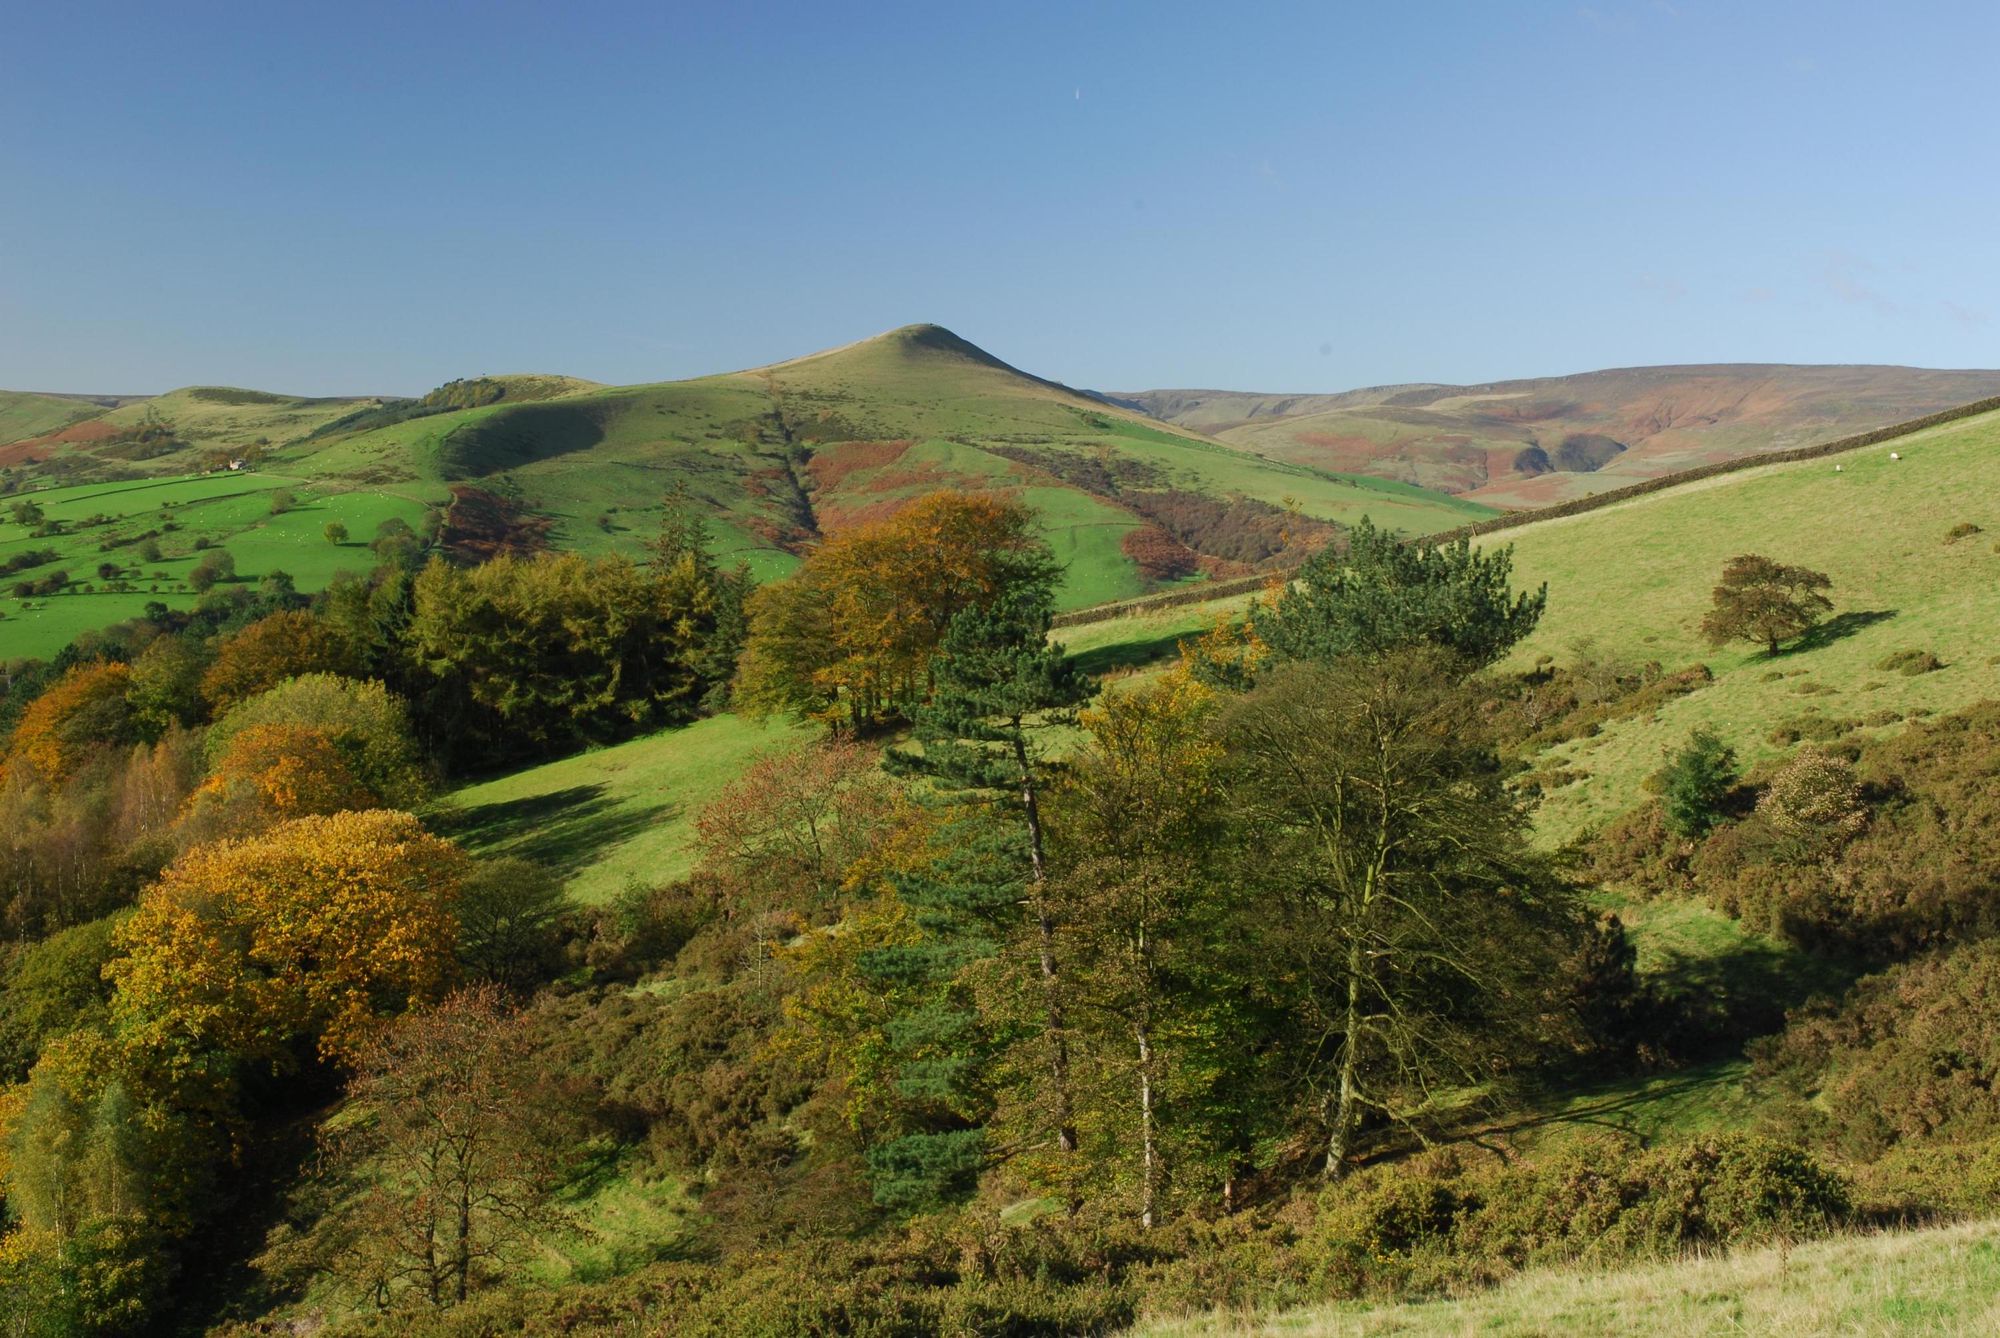 Hotels, Cottages, B&Bs & Glamping in Derbyshire & the Peak District 